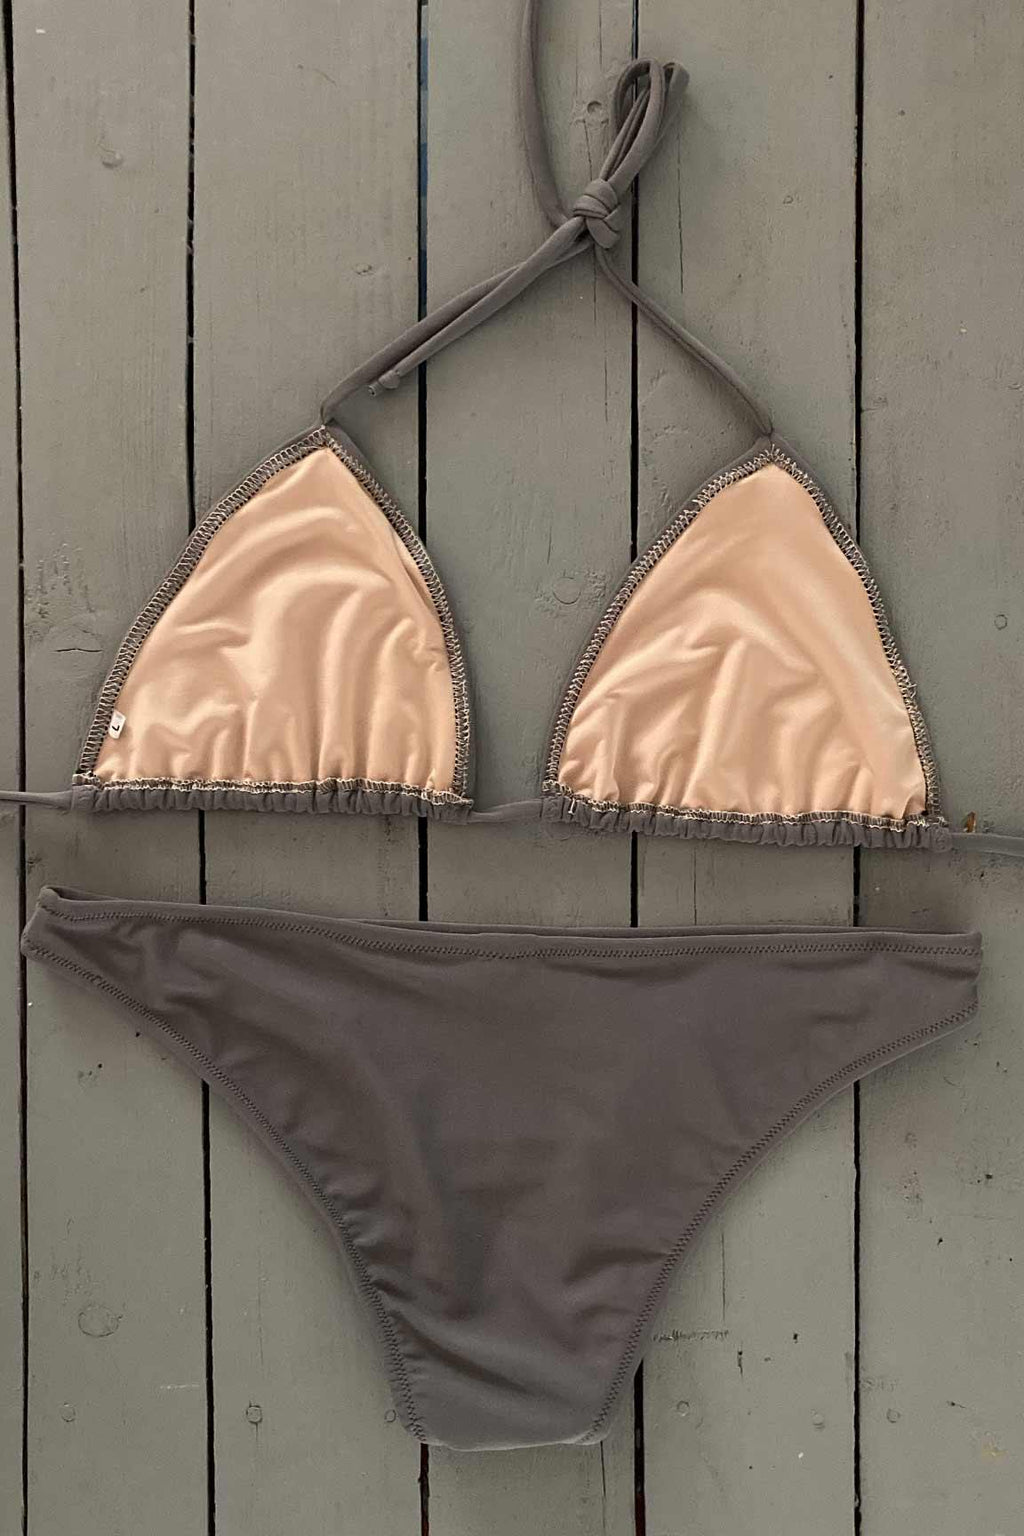 Splash around by the pool or beach this summer in this super cute grey classic bikini bottom. Made with the finest quality of soft and stretchy Lycra to achieve the best fit. Order yours today. @jillesbikinis